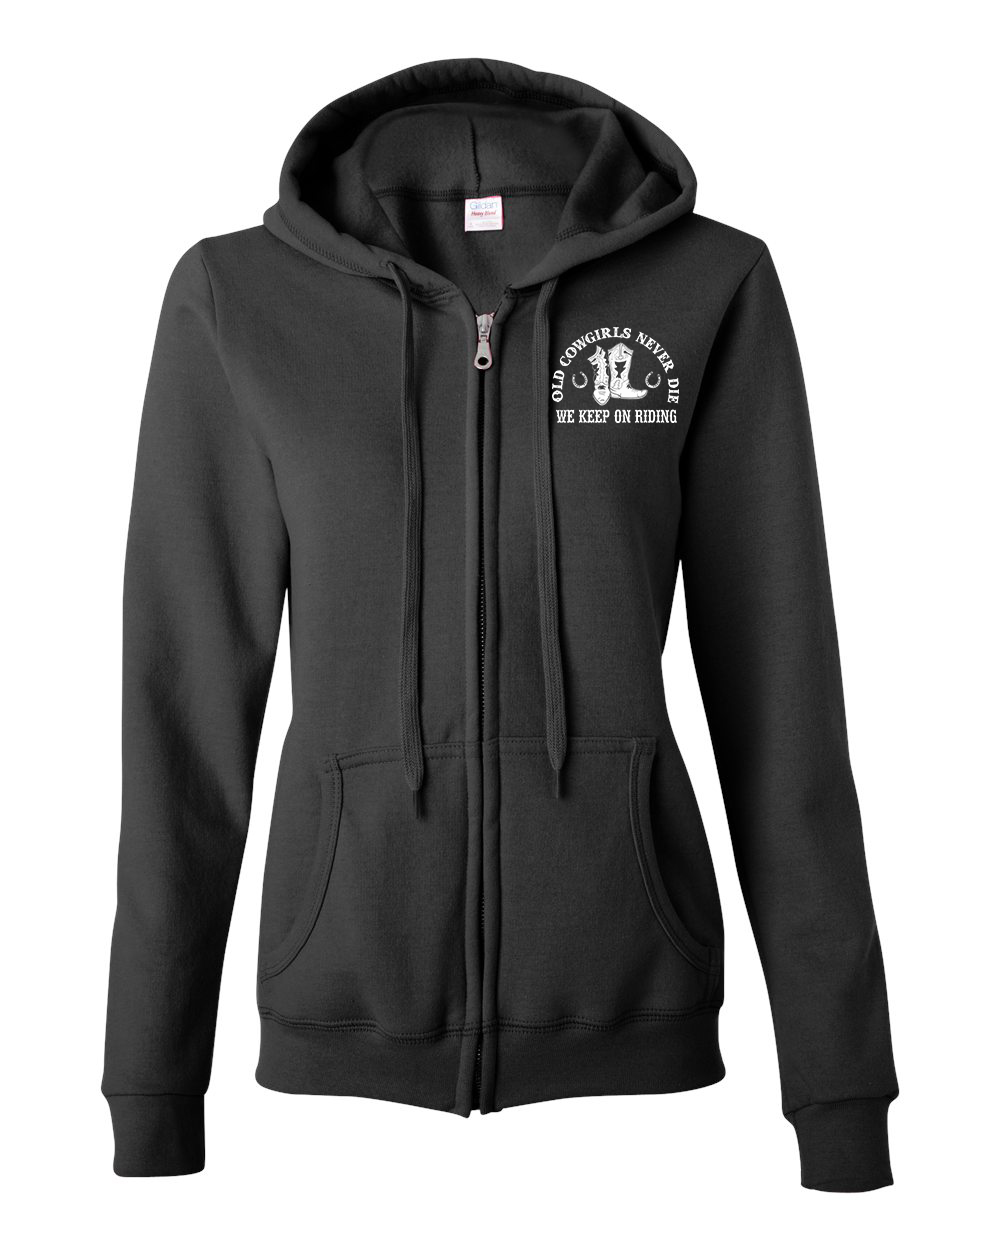 A black zip up hoodie with the words " to die for " on it.